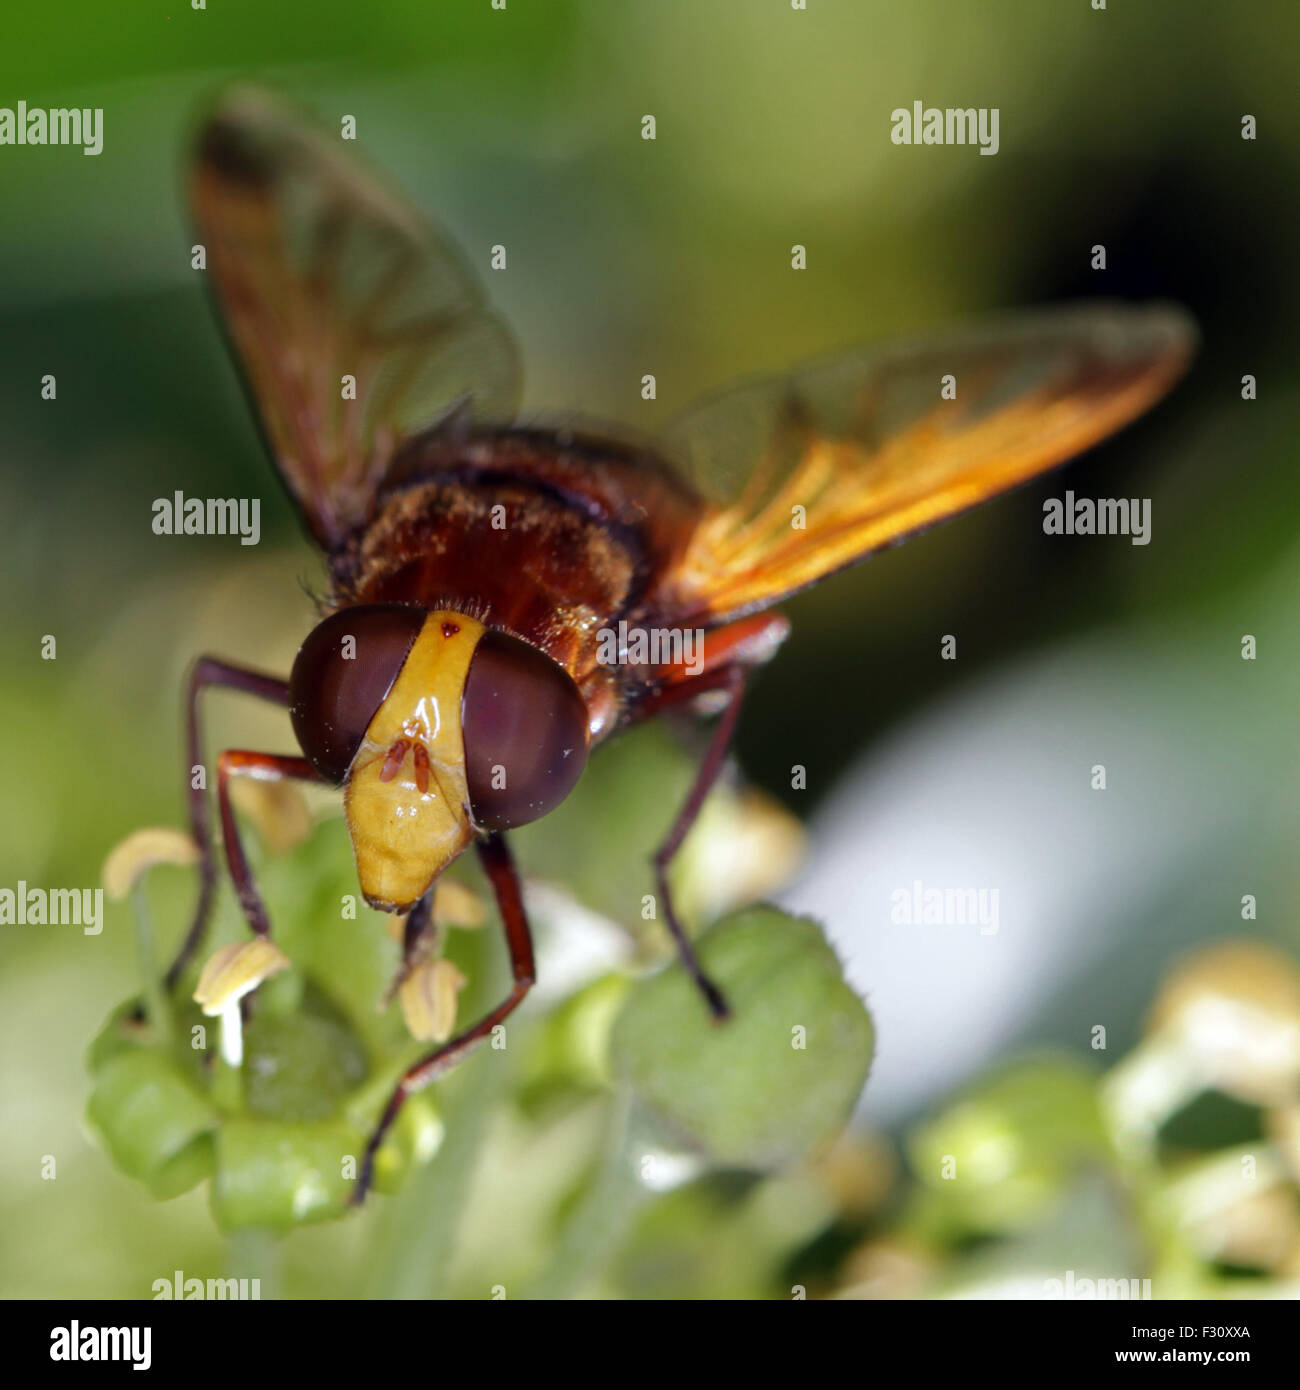 Close-up, macro photo of a Wasp feeding on an Ivy flower. Stock Photo